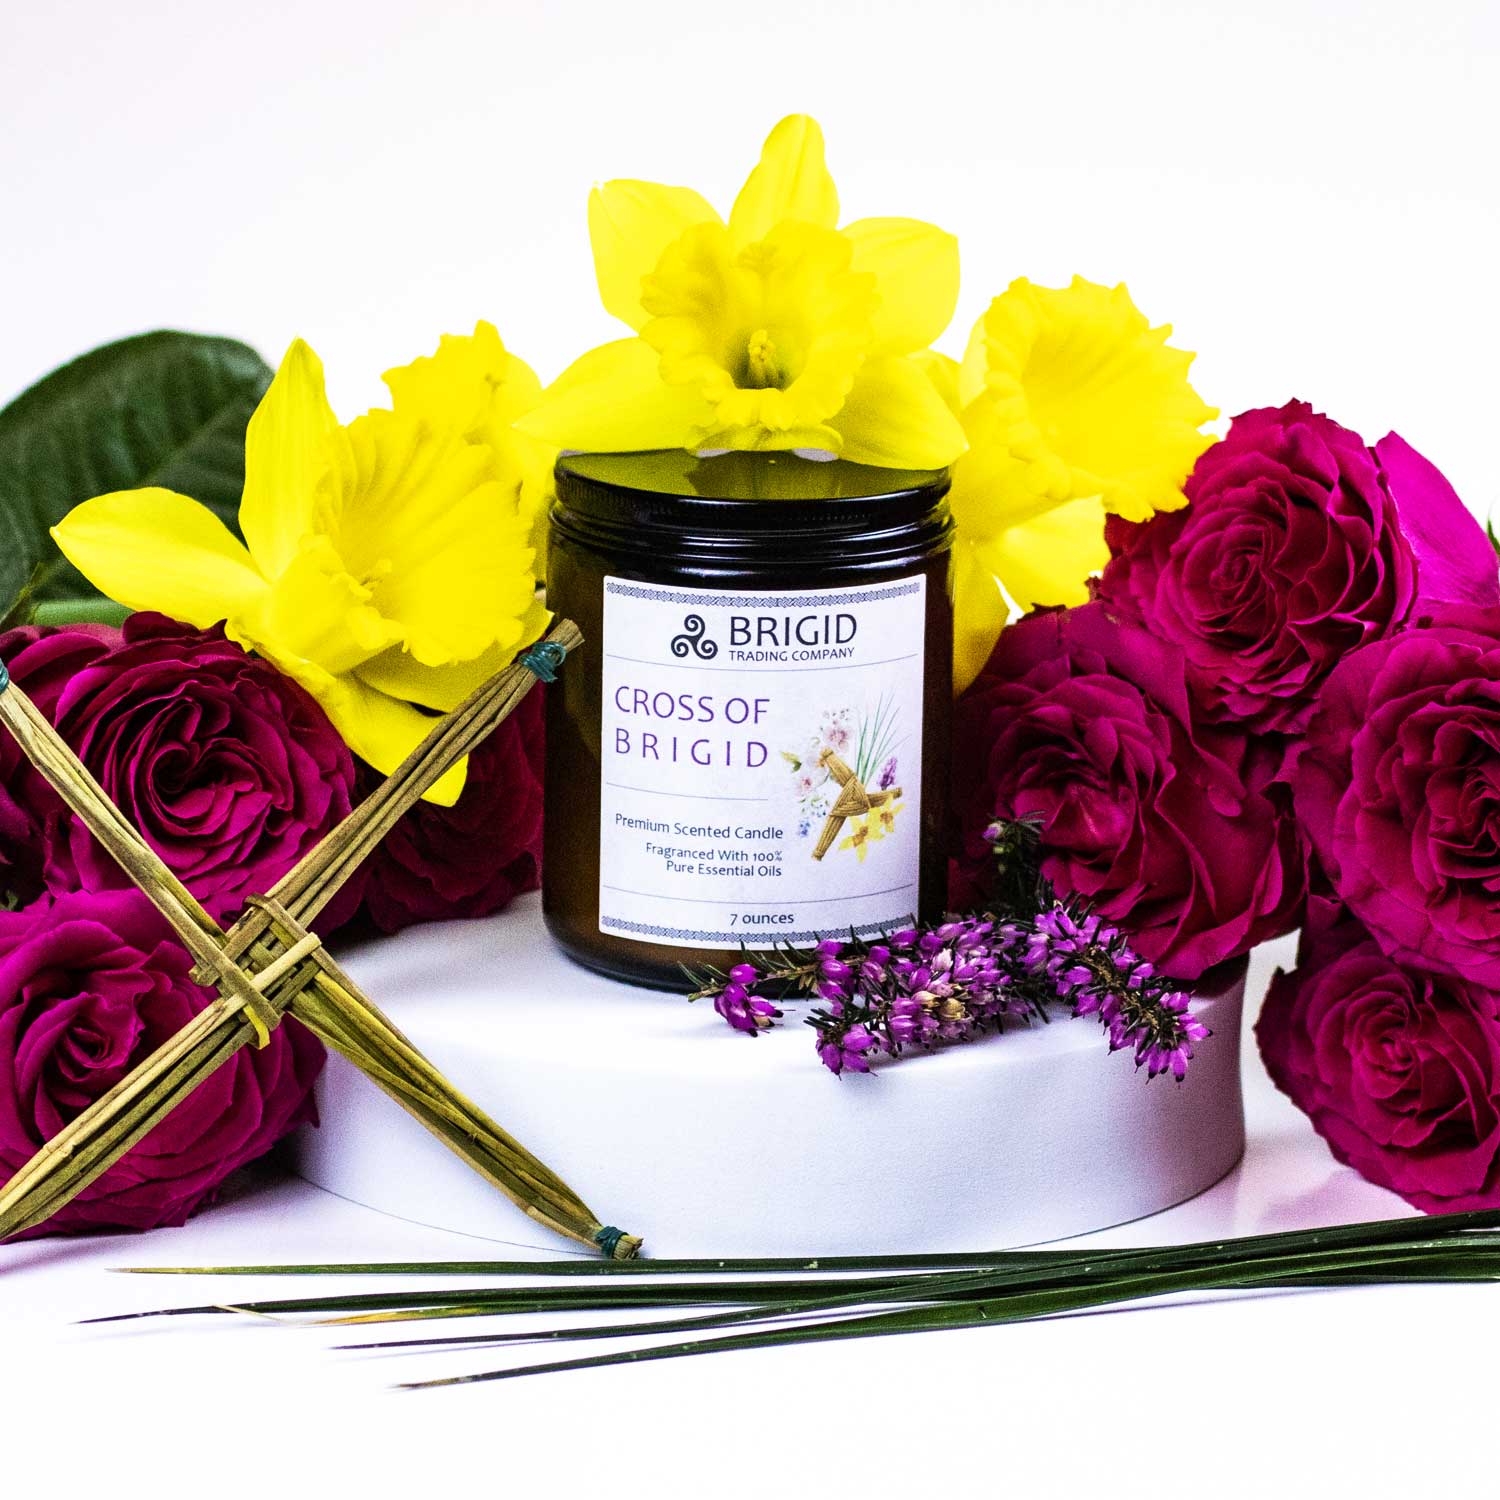 cross of brigid candle with flowers lifestyle shot image is white with candle in the center and a st brigids cross made of reeds, roses, daffodils narcissus, vetiver, and pink heather fresh flowers by brigid trading company llc